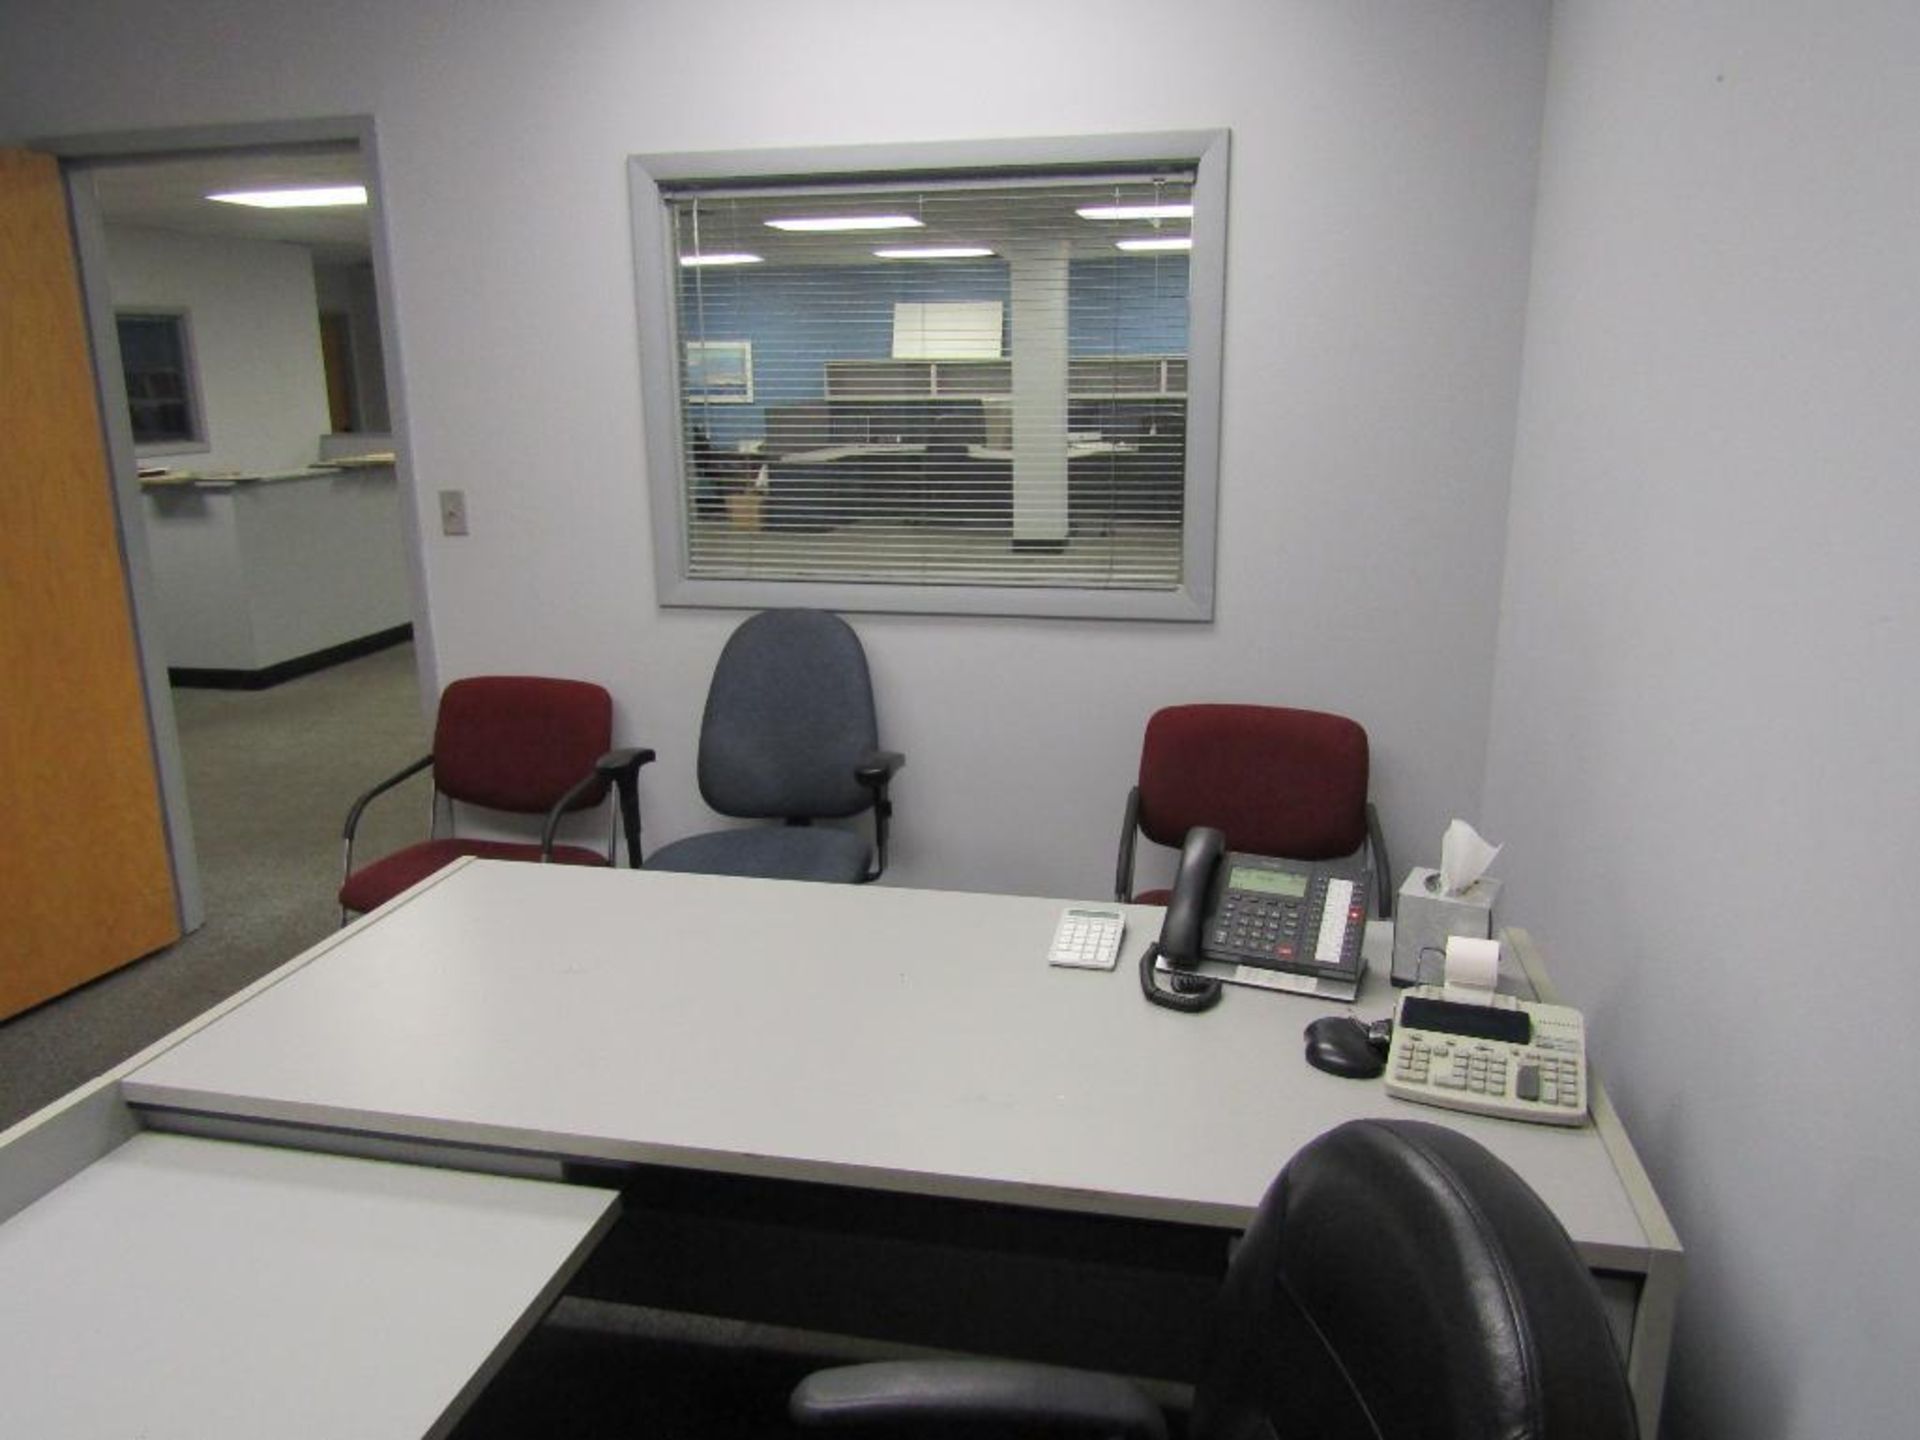 Office Desk, Chair, File Cabinets - Image 3 of 10